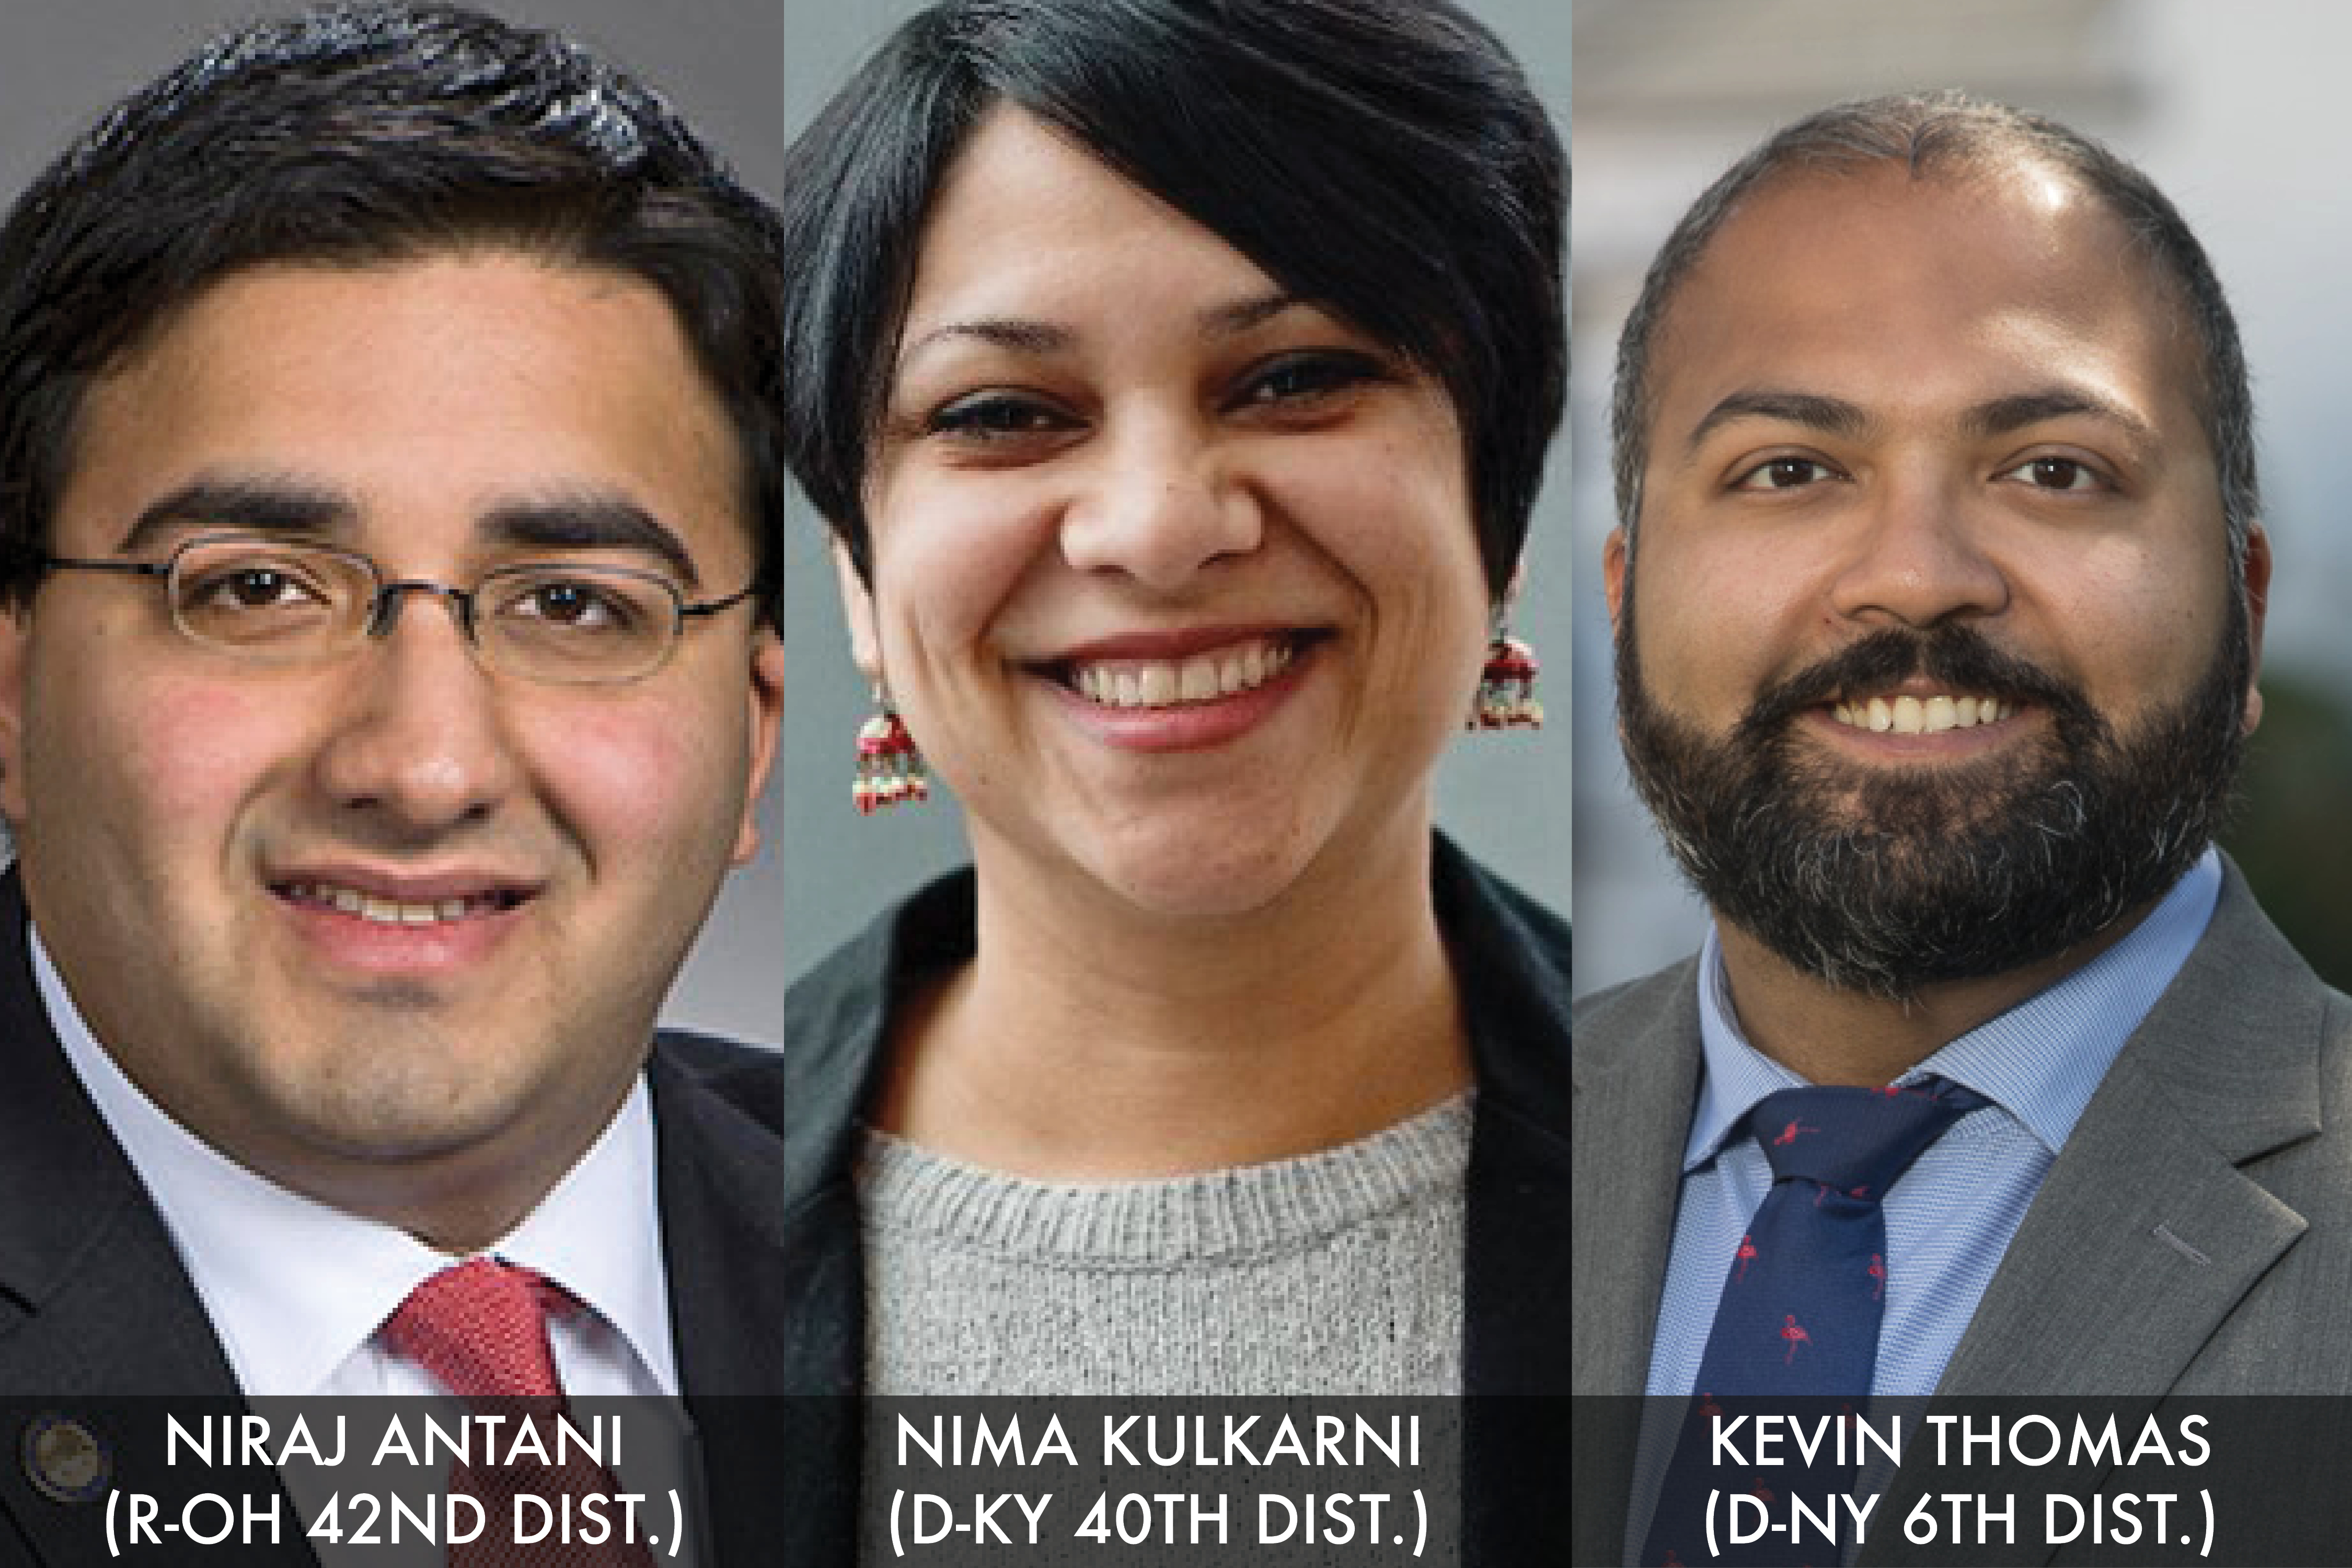 Complete breakdown of how Indian American candidates fared in midterms 2018